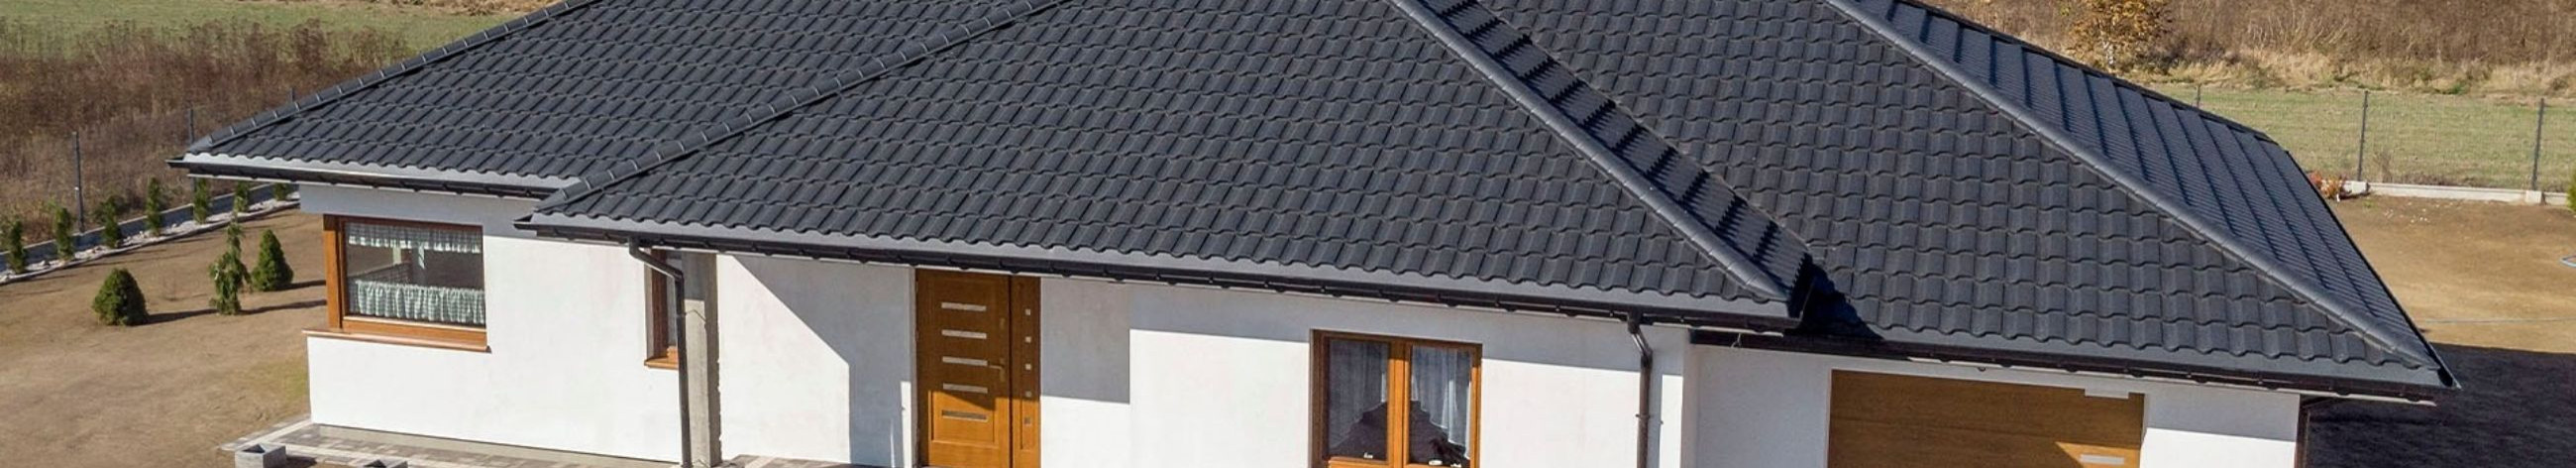 Roof stains, modular roofs, gutters, Wind Boxes, roofing installation, measurements and consultations, delivery across estonia, rain gutter installation, consultations, roof installation